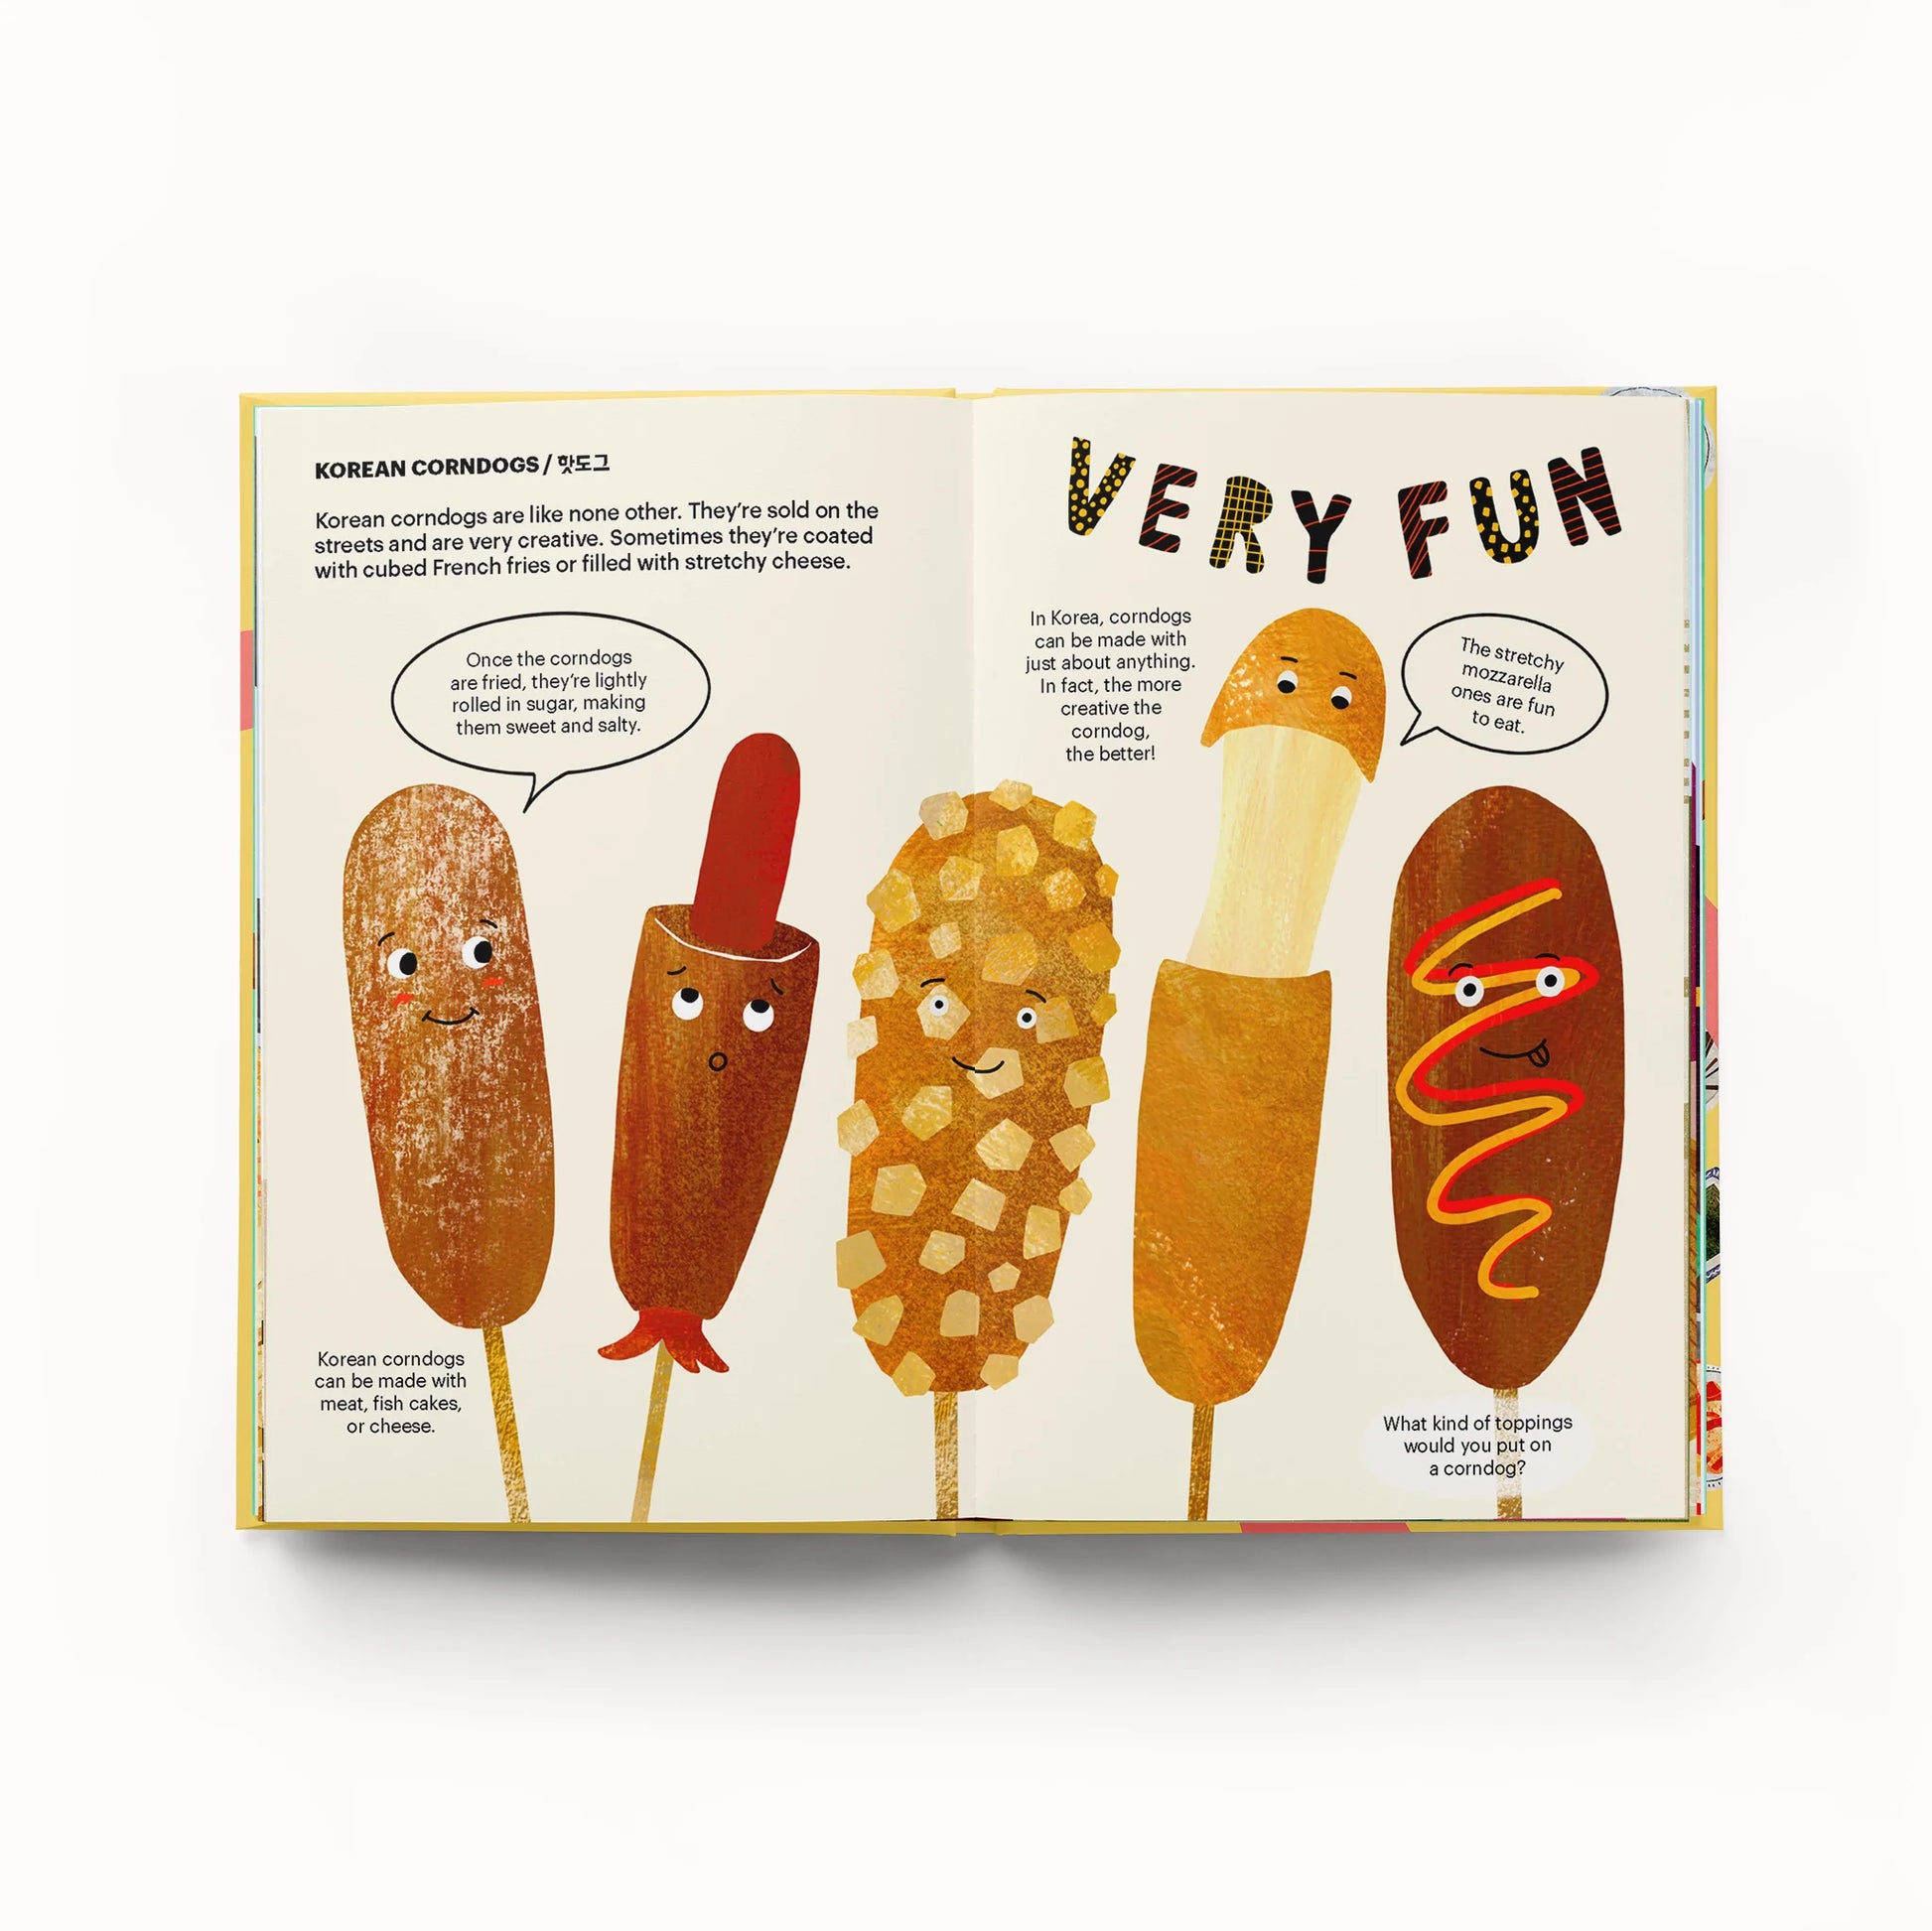 Inside pages of "A Very Asian Guide to Korean Food" --  Pages show 5 korean corndogs, all with different toppings and/or insides 